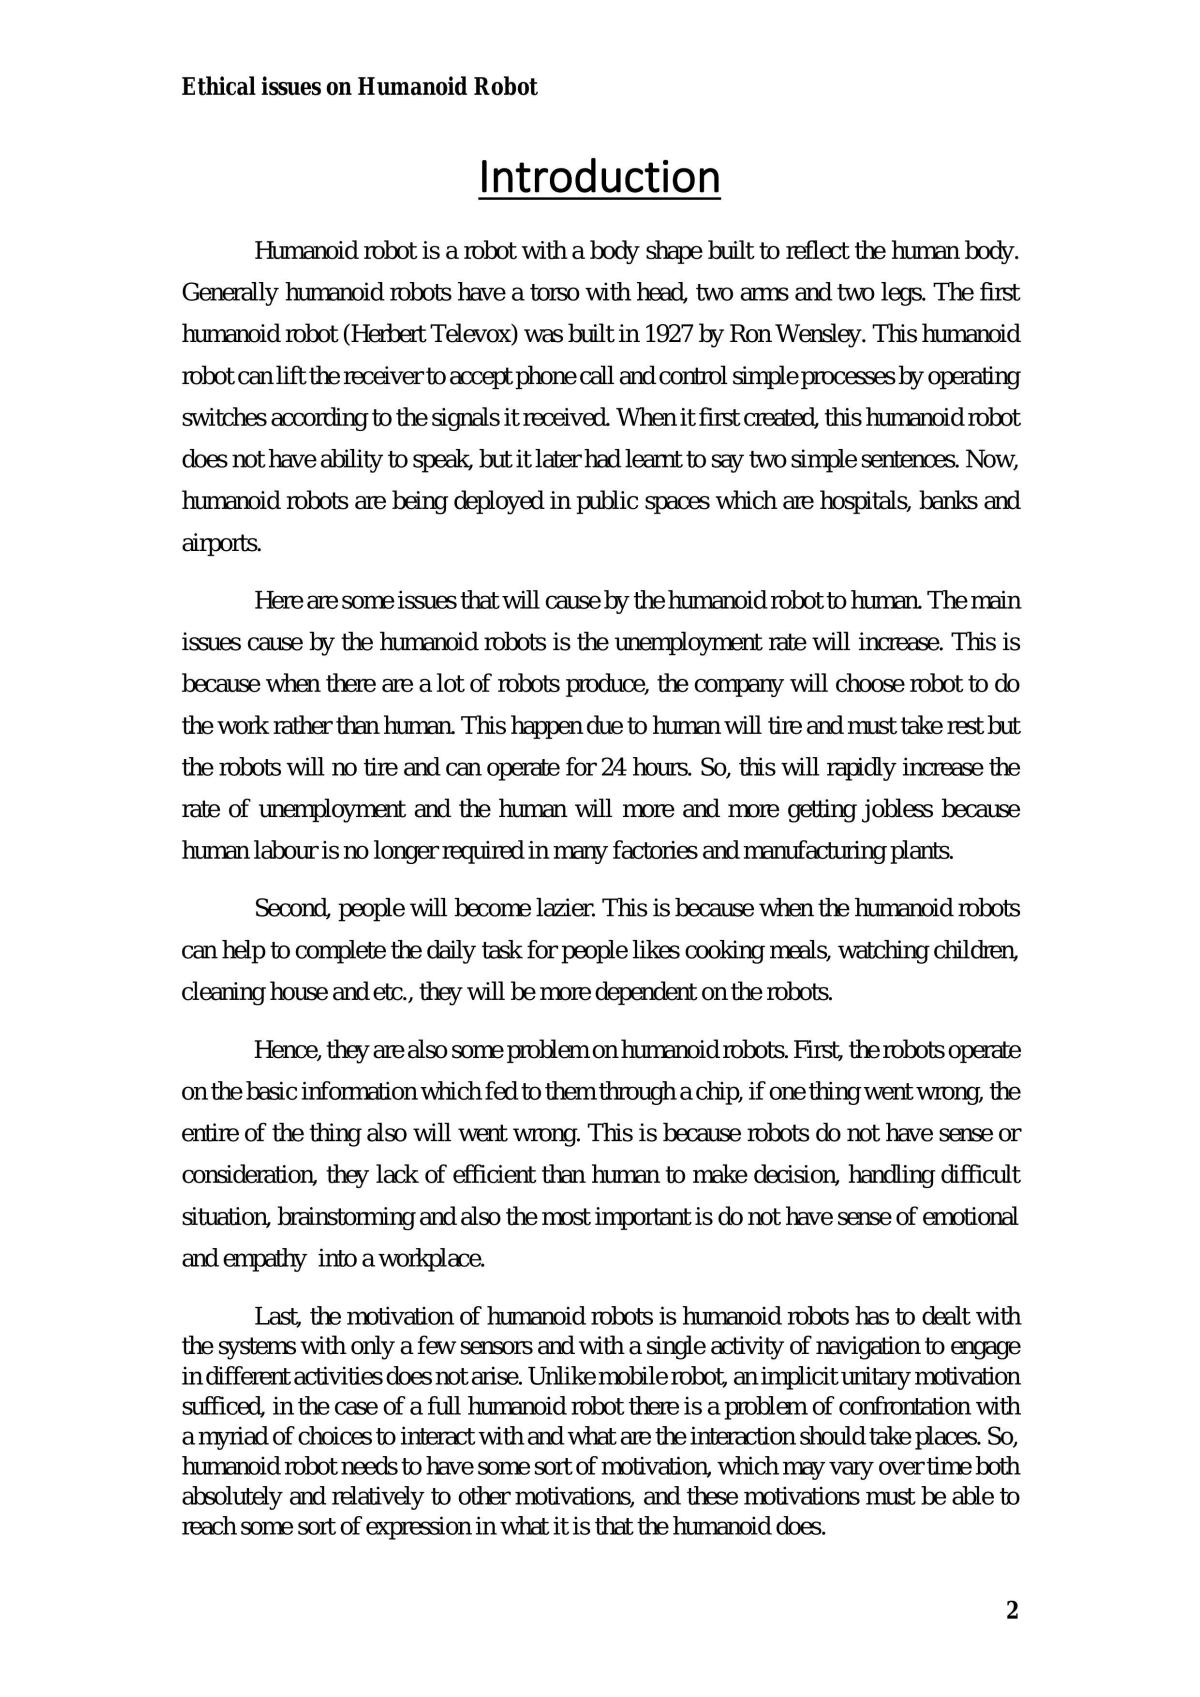 Ethical issues on Humanoid Robot - Page 2